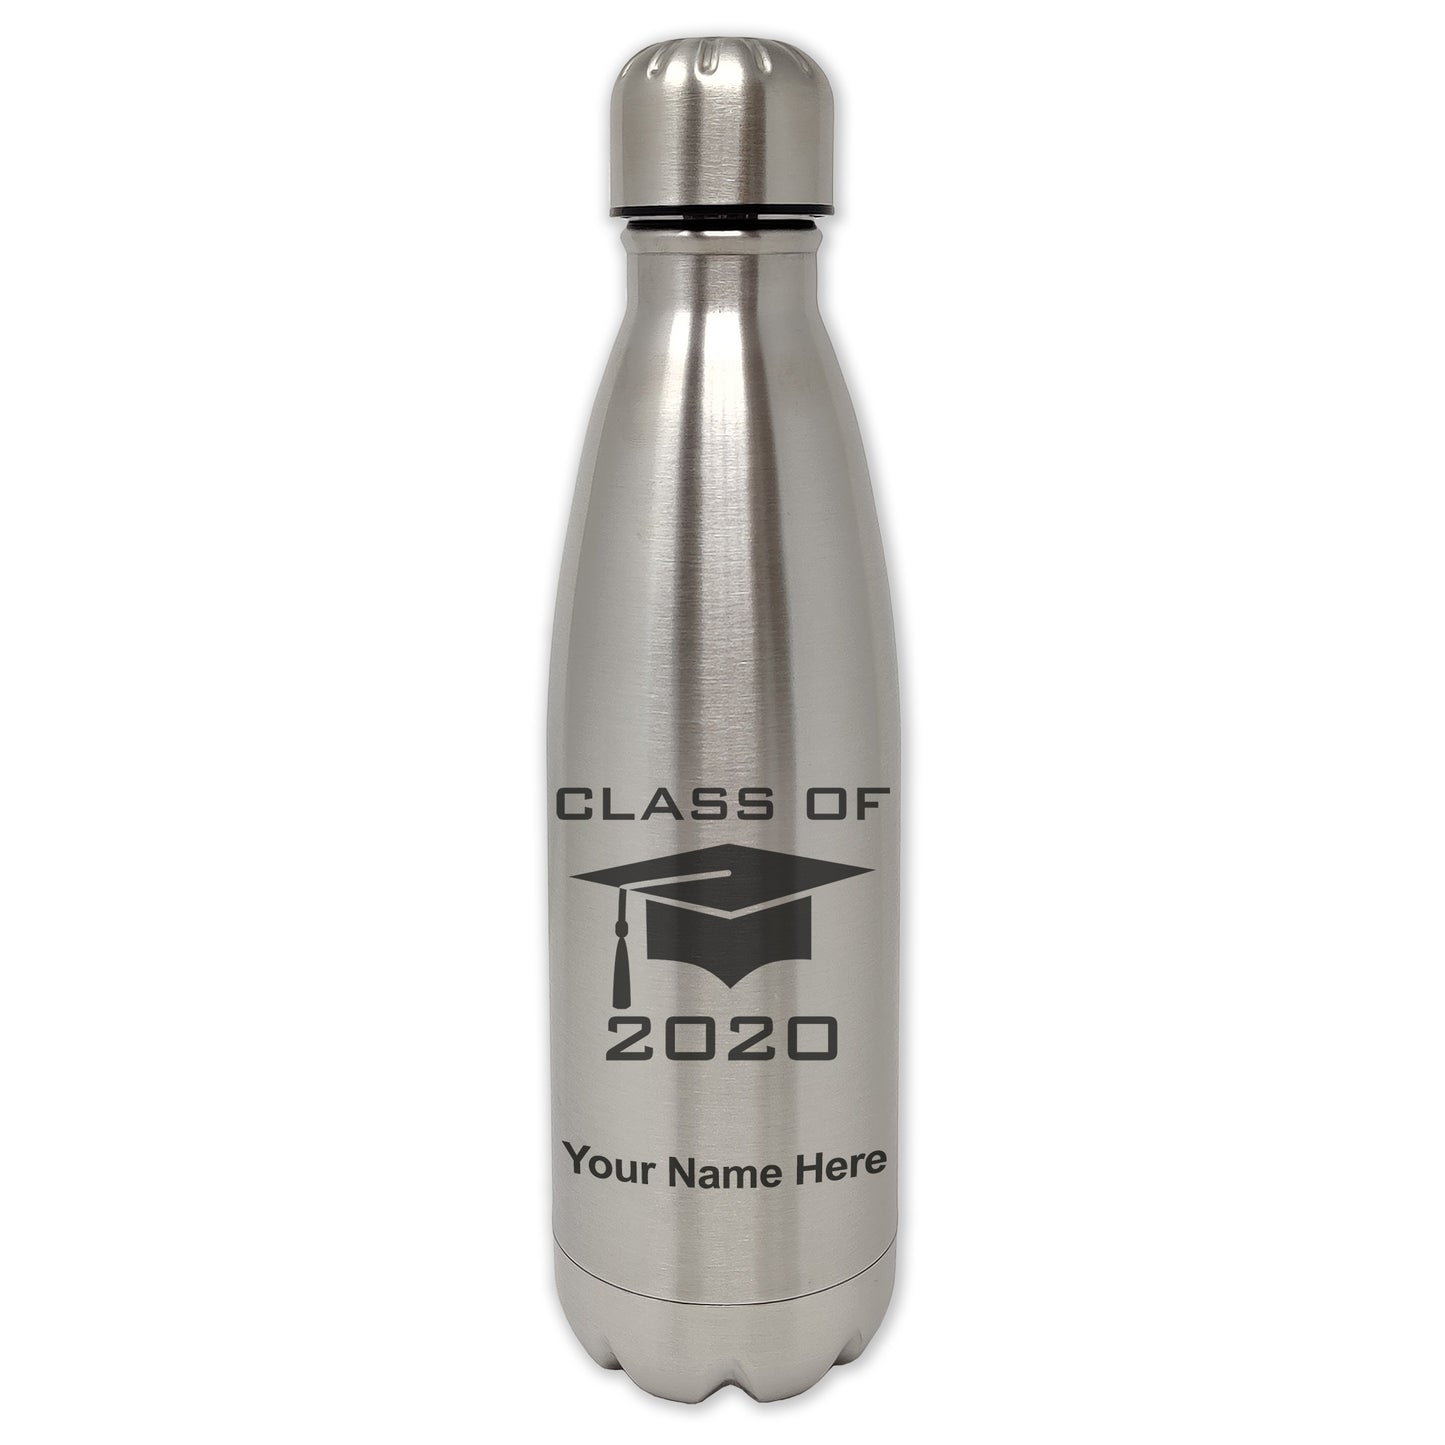 LaserGram Double Wall Water Bottle, Grad Cap Class of 2020, 2021, 2022, 2023, 2024, 2025, Personalized Engraving Included